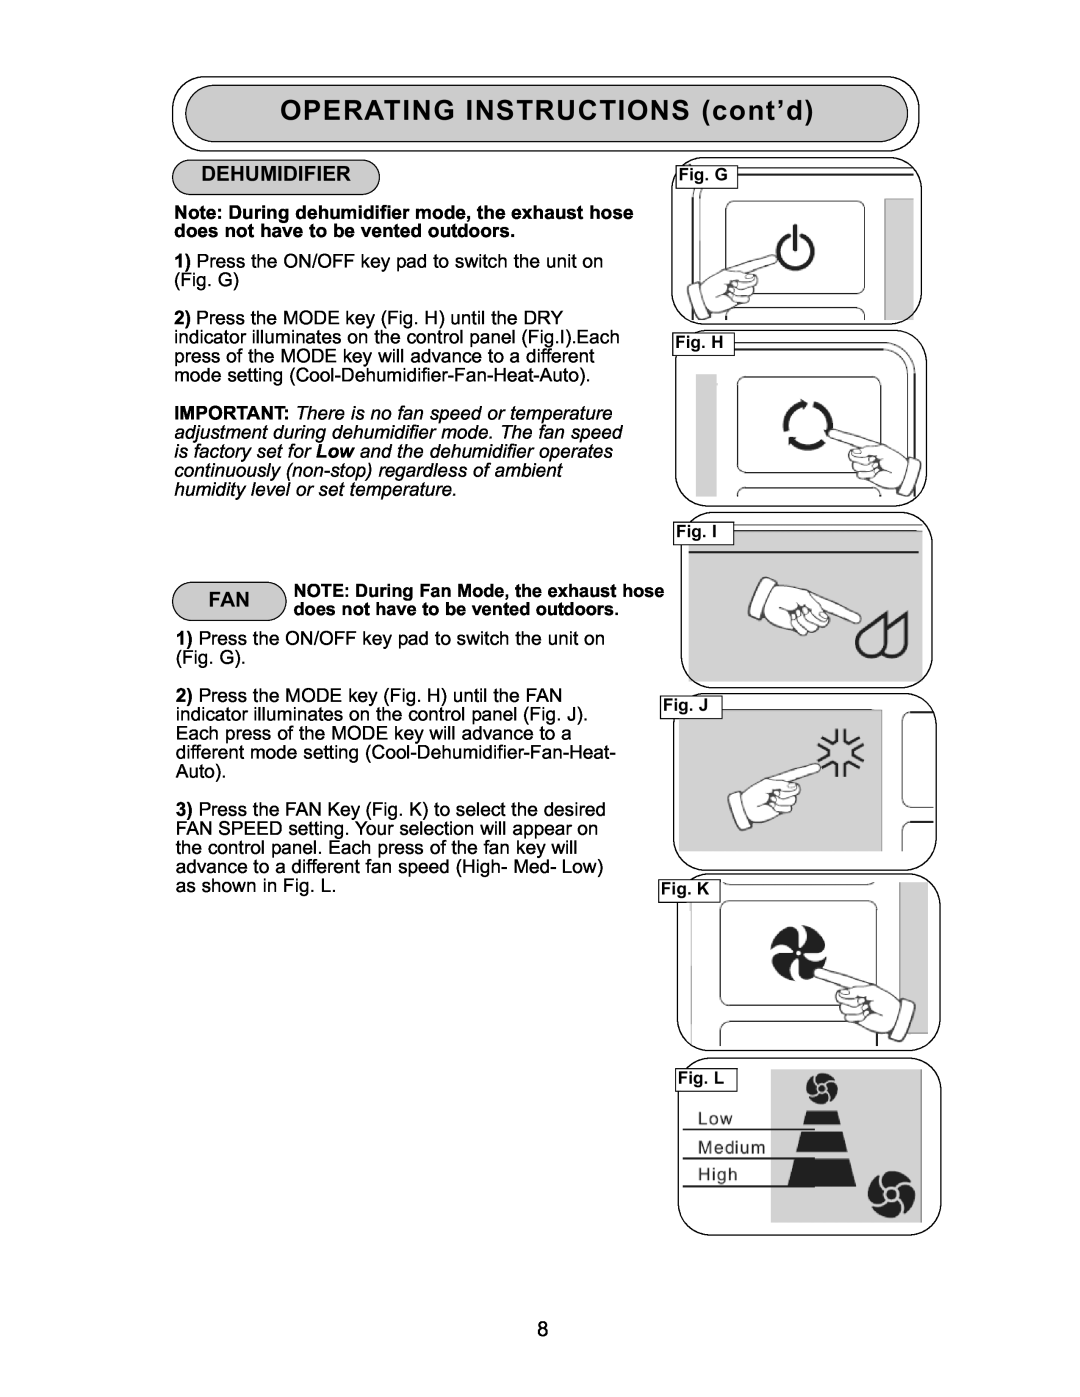 Danby DPAC 9009 manual OPERATING INSTRUCTIONS cont’d, Dehumidifier, does not have to be vented outdoors 